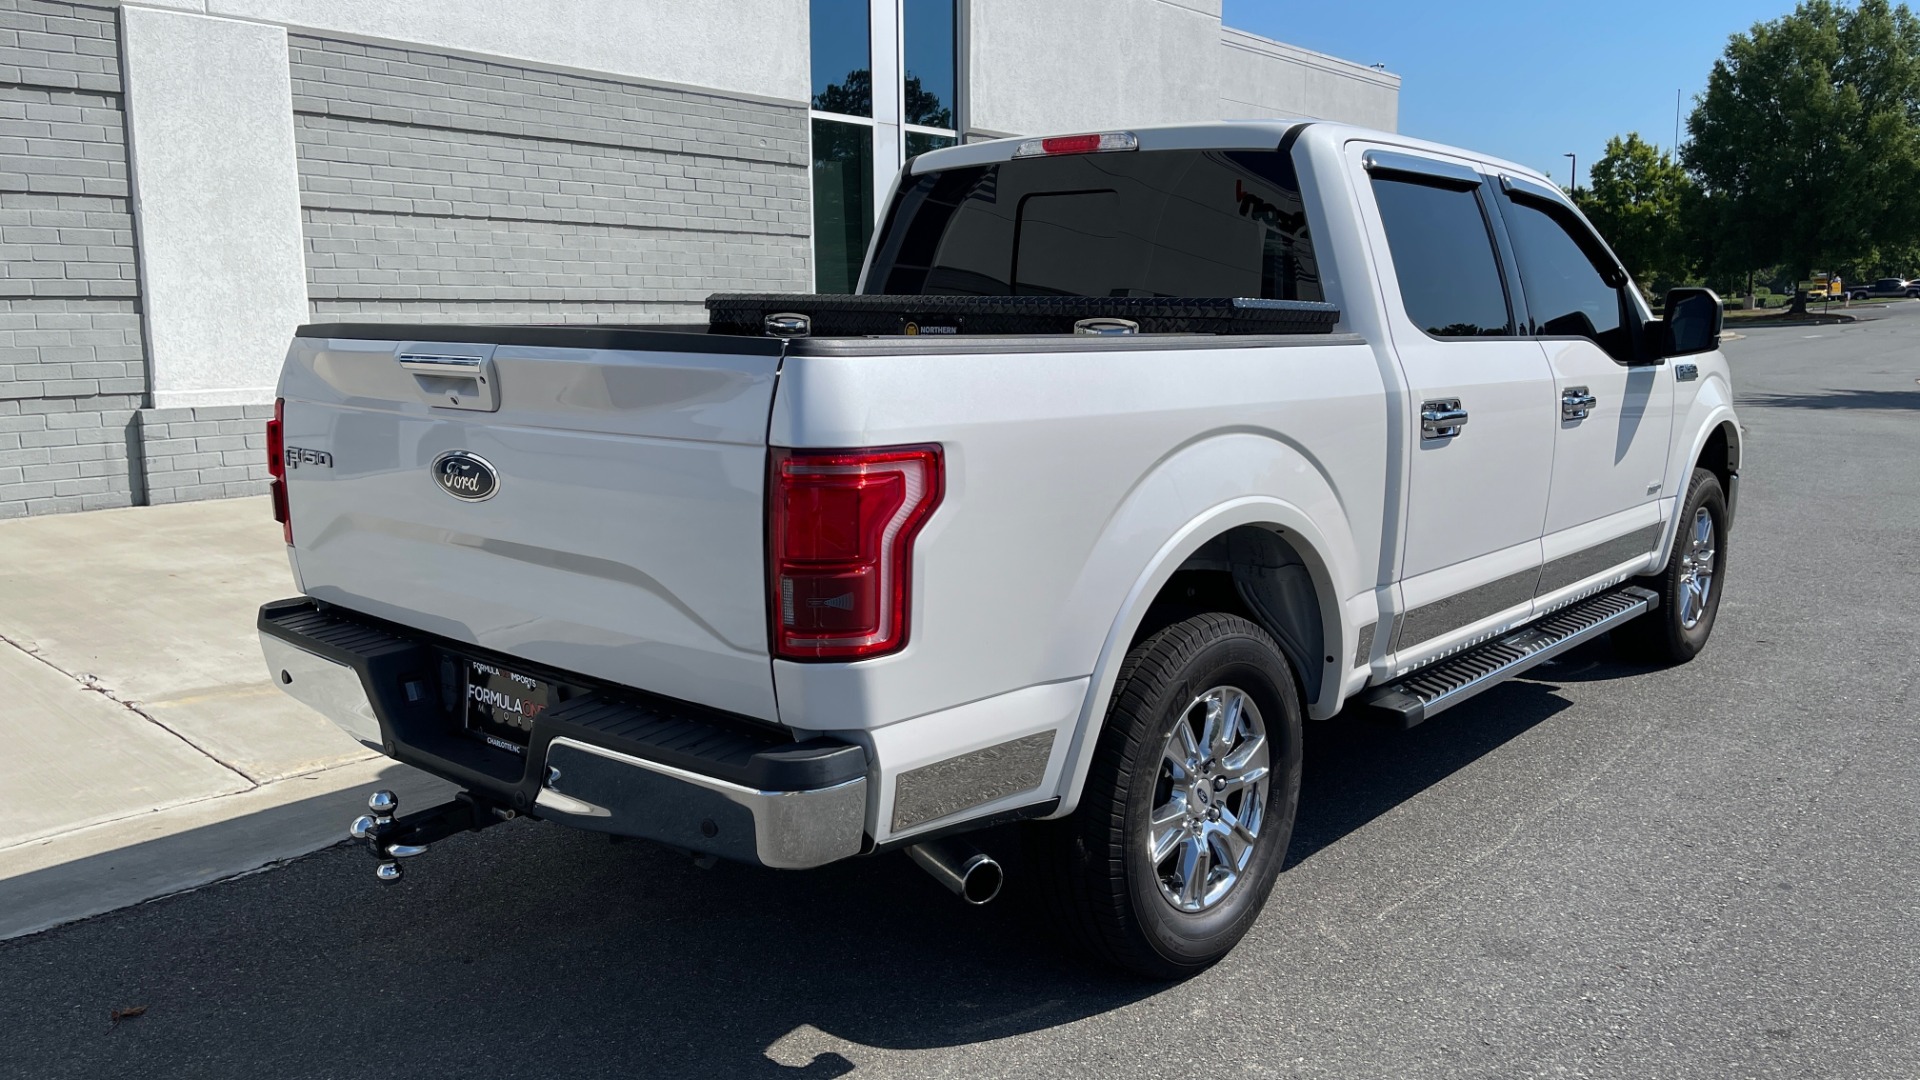 Used 2016 Ford F-150 LARIAT 4X4 / 3.5L V6 / 6-SPD AUTO / BLIS / SONY / NAV / REARVIEW for sale Sold at Formula Imports in Charlotte NC 28227 2